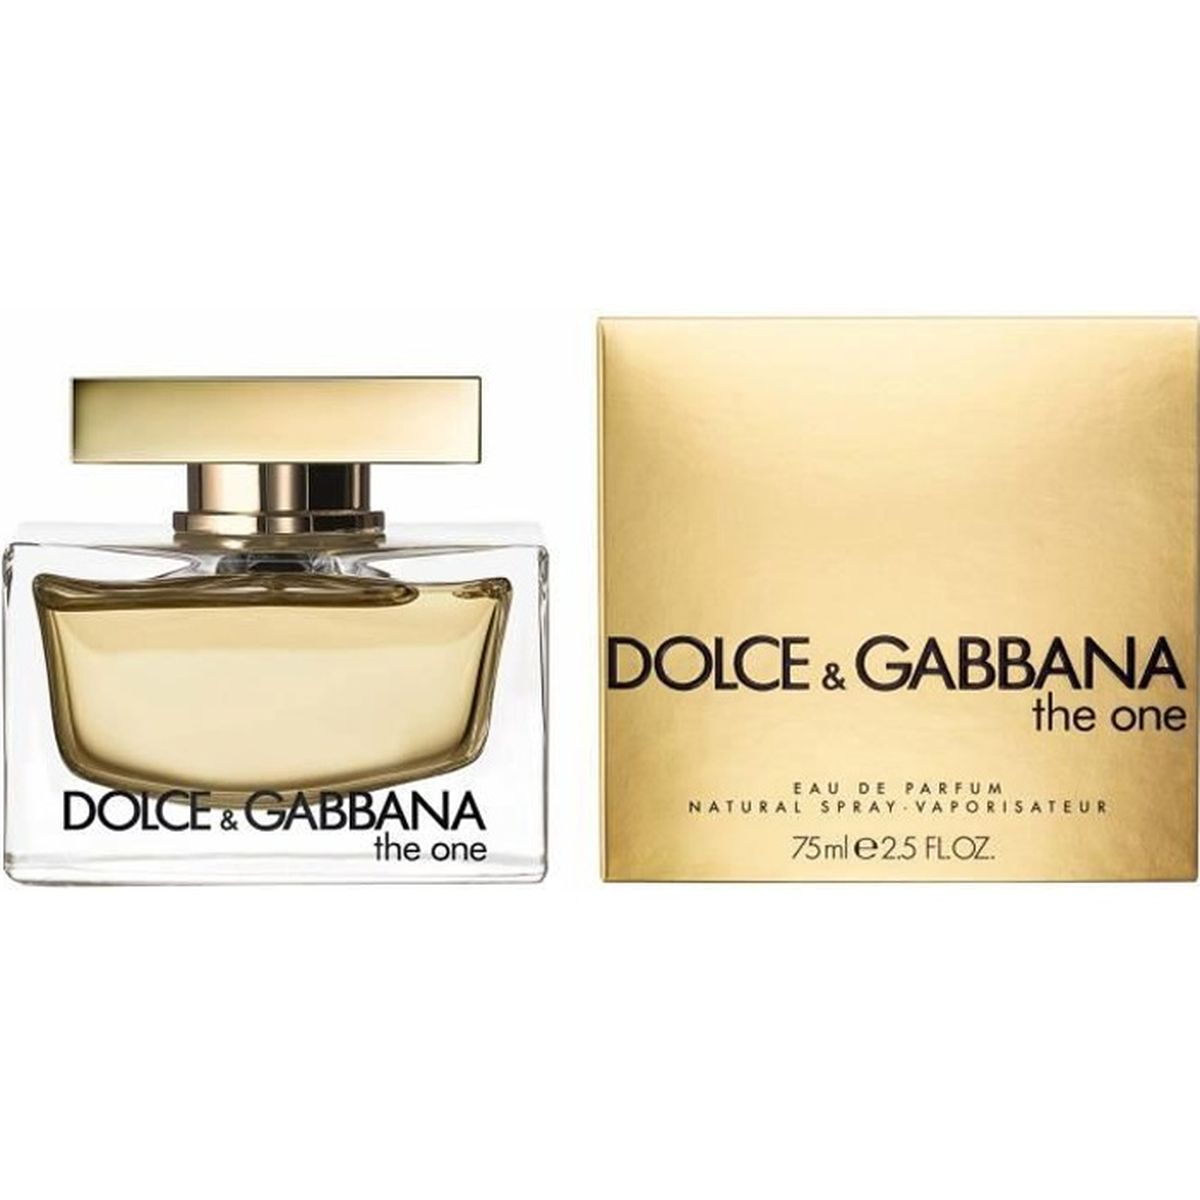 the one by dolce & gabbana